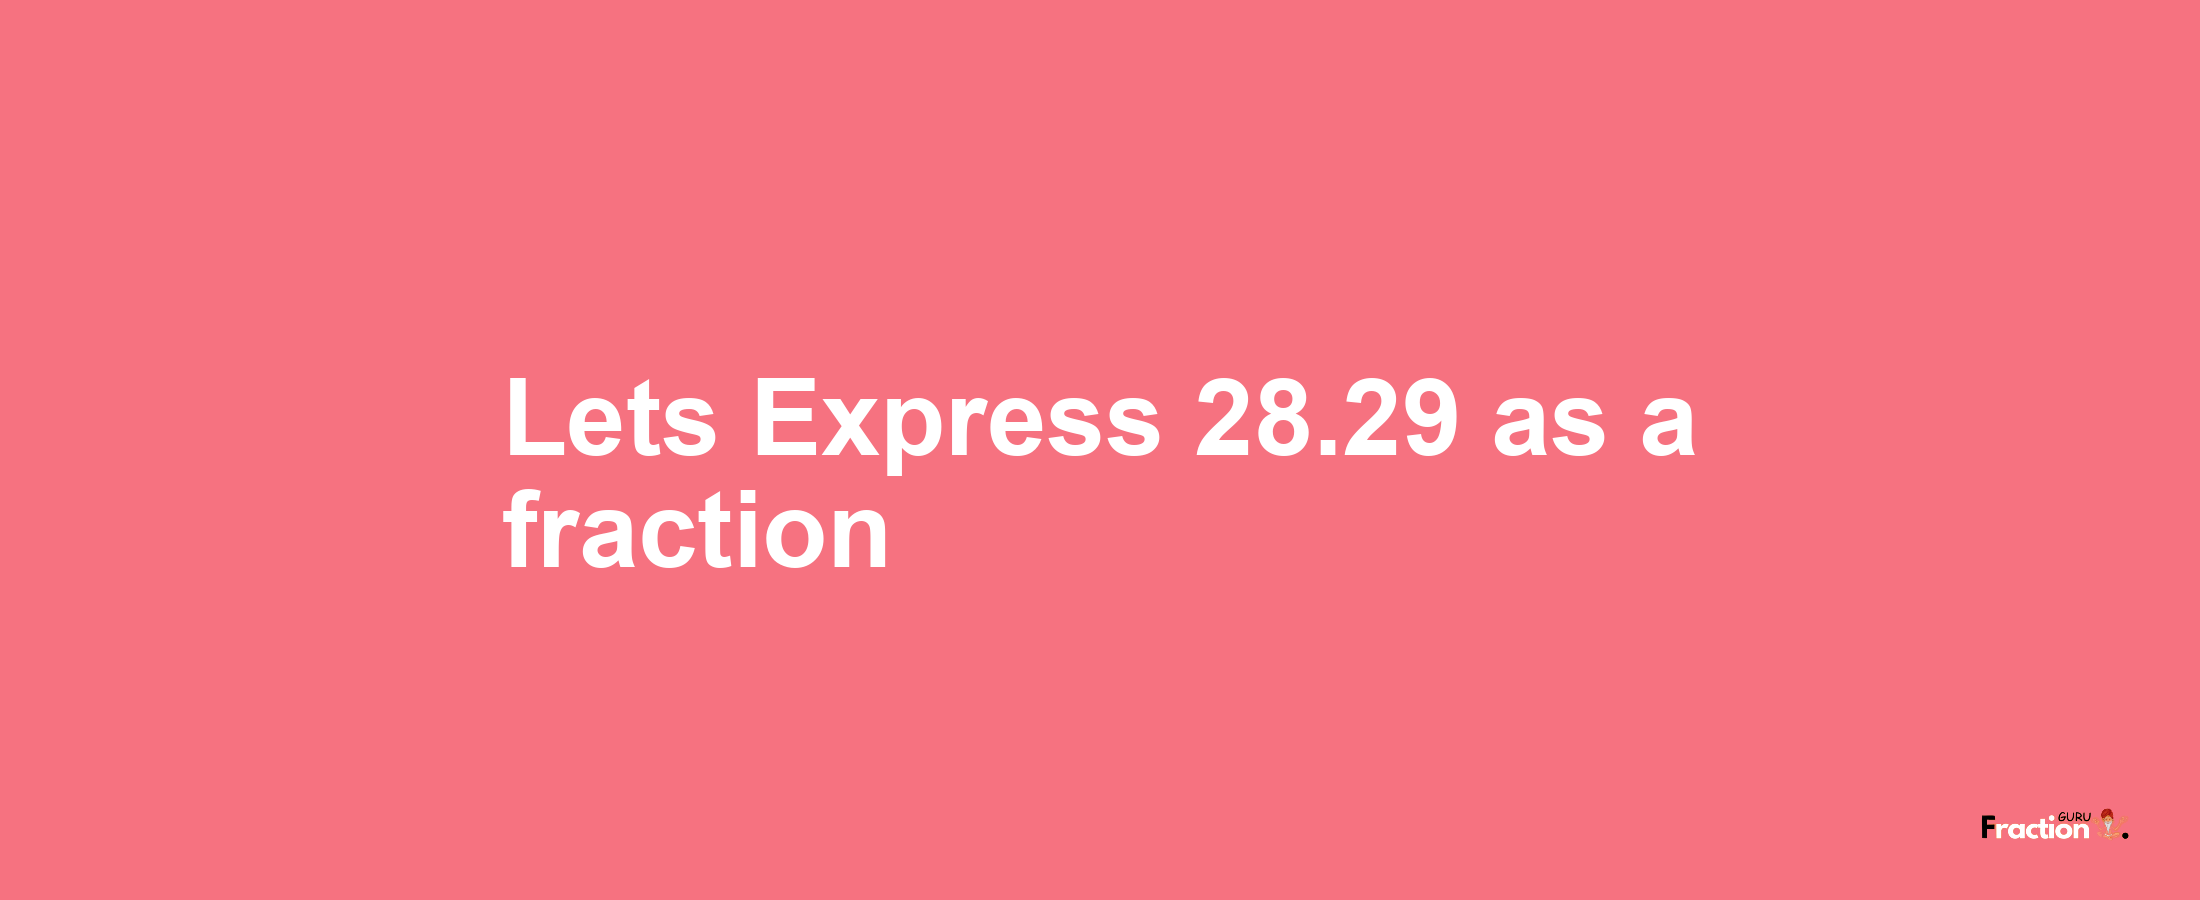 Lets Express 28.29 as afraction